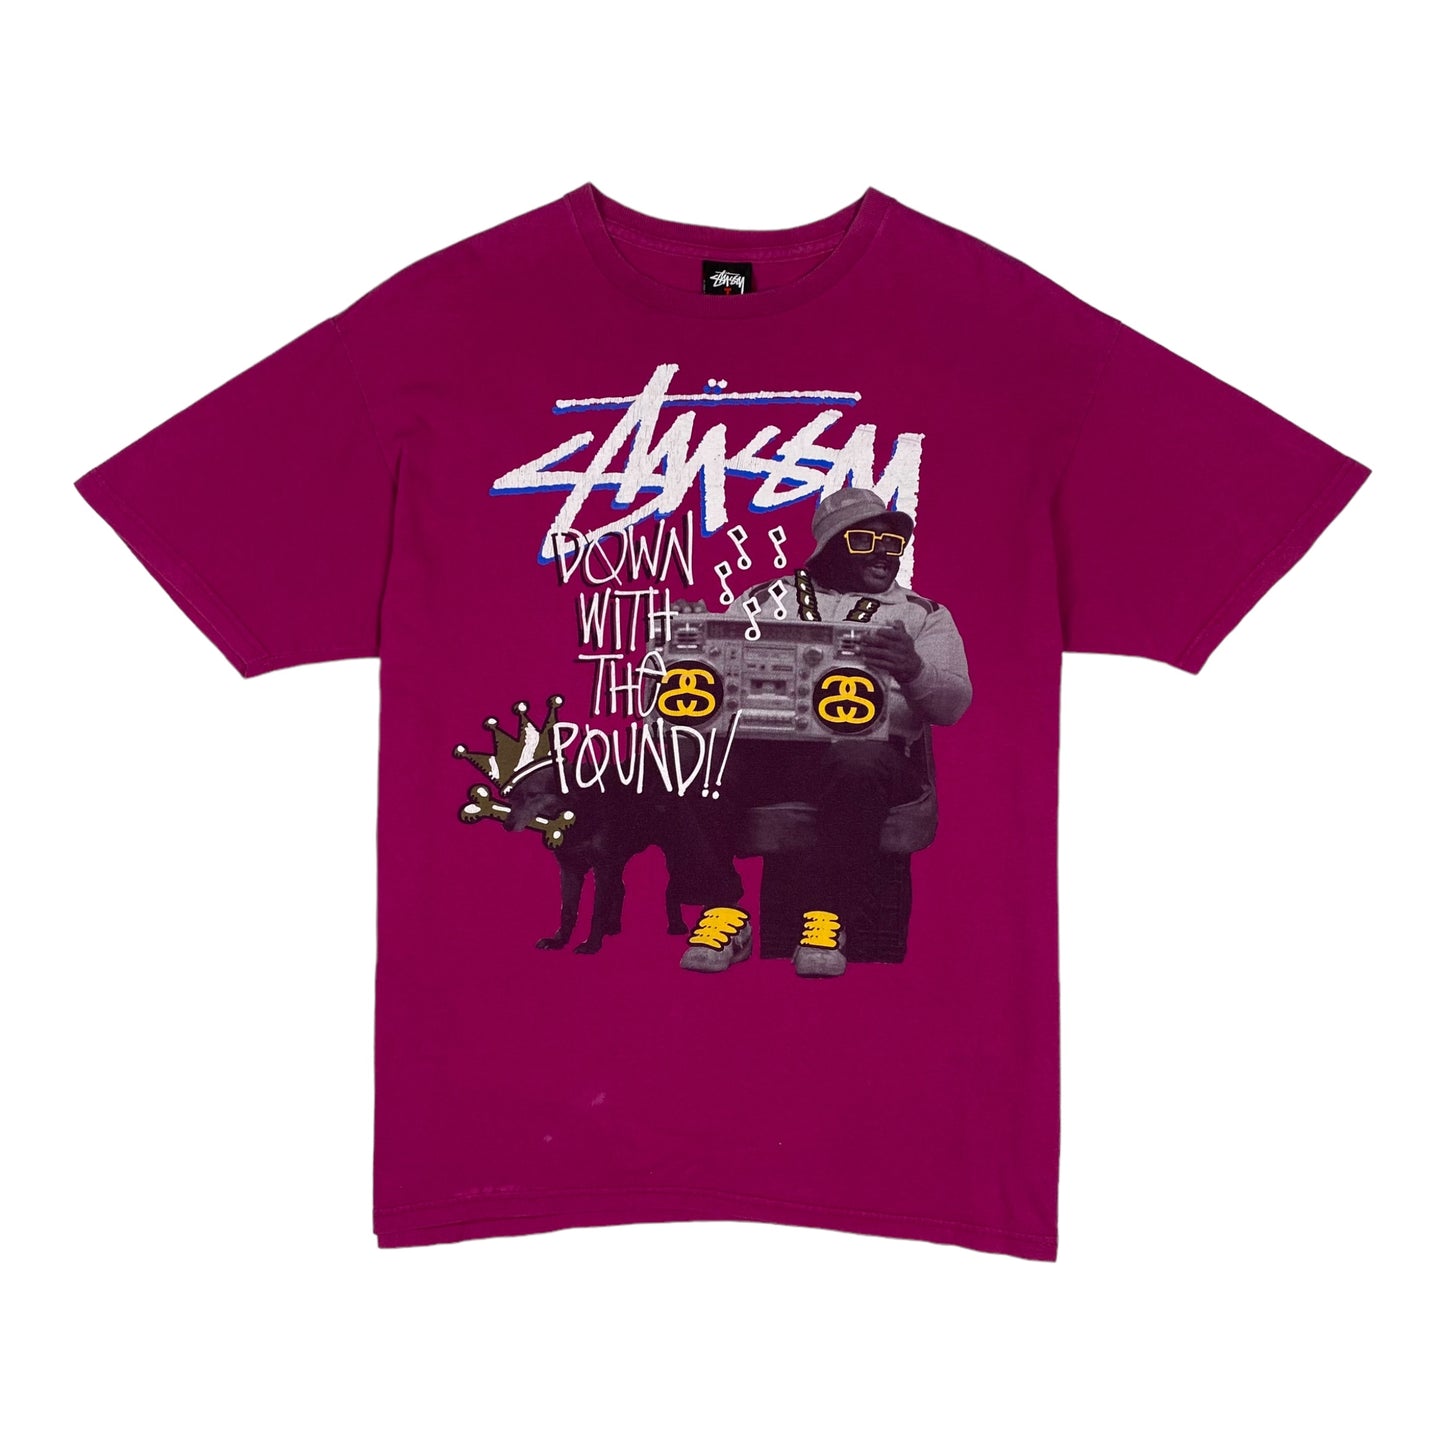 STUSSY "DOWN WITH THE POUND" TEE (XL)